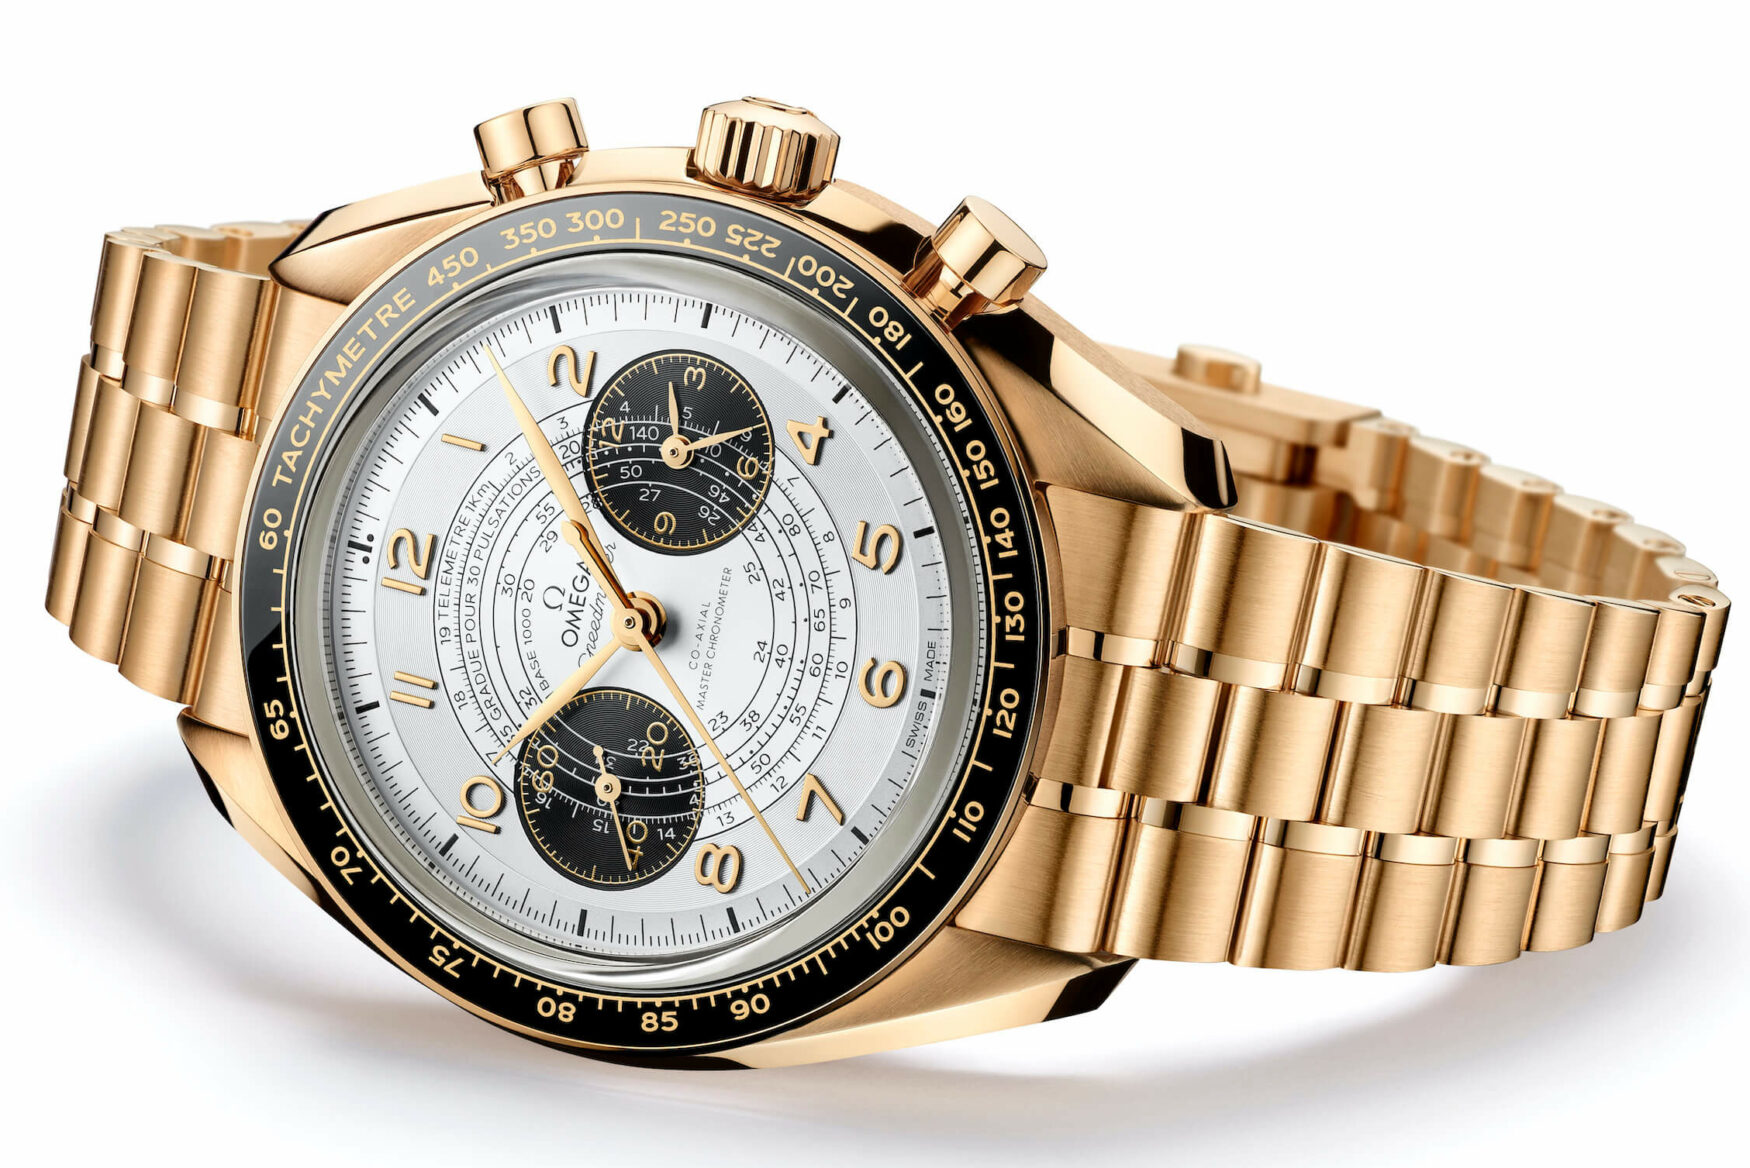 This new Omega Speedmaster Chronoscope Paris 2024 Collection marks 100 days until the opening of the Olympic Games